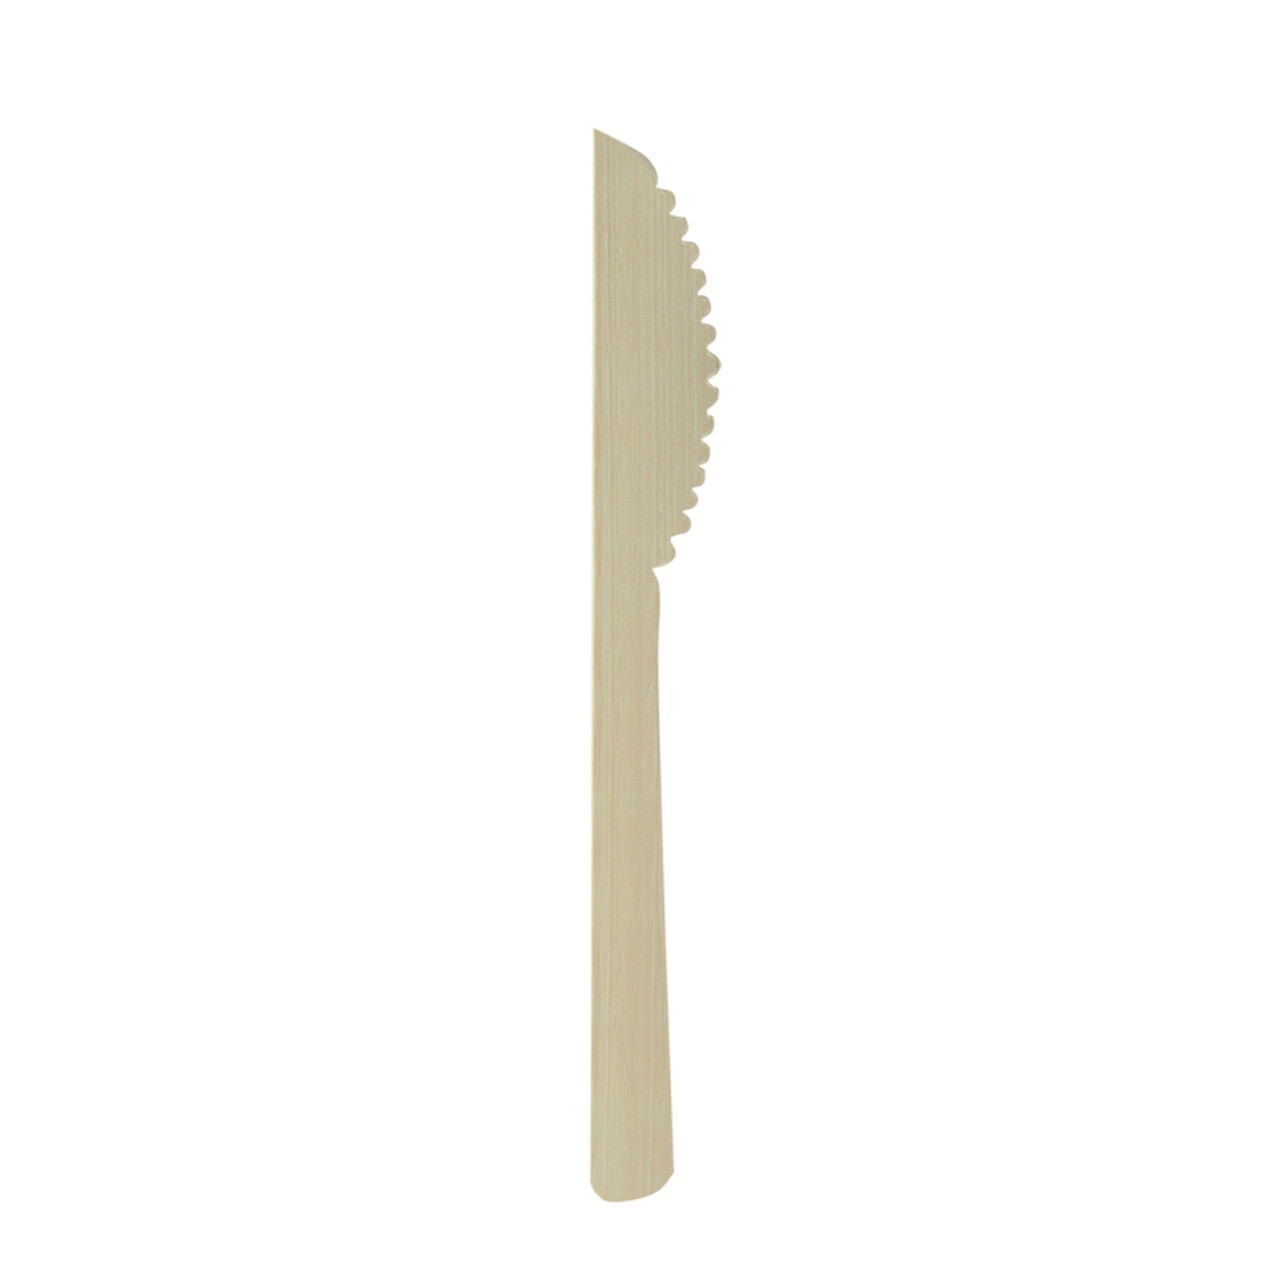 210CVB142 Small Wooden Knife L:5.47in - 100 pcs